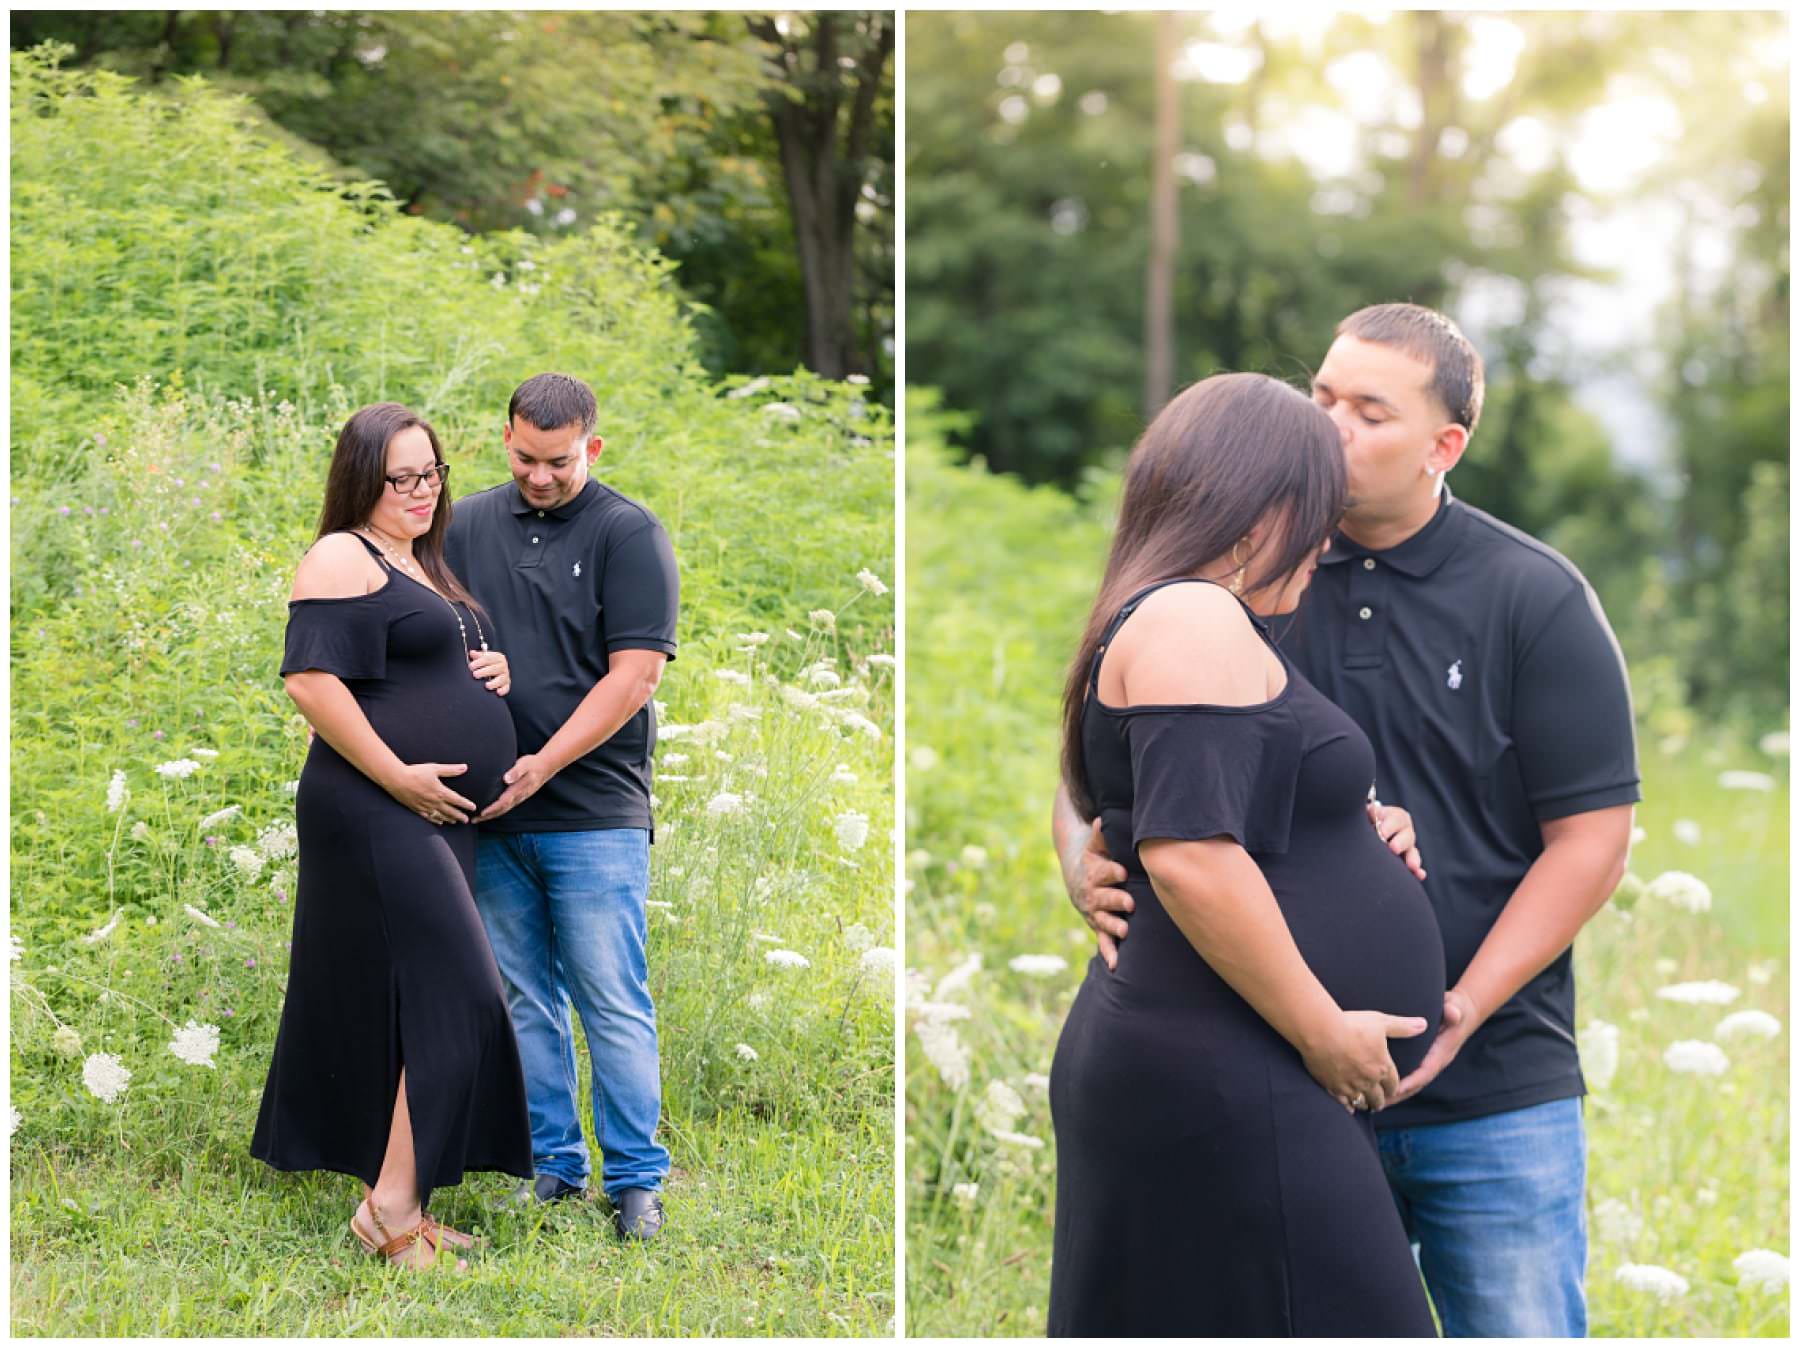 Outdoor maternity photos with wildflowers